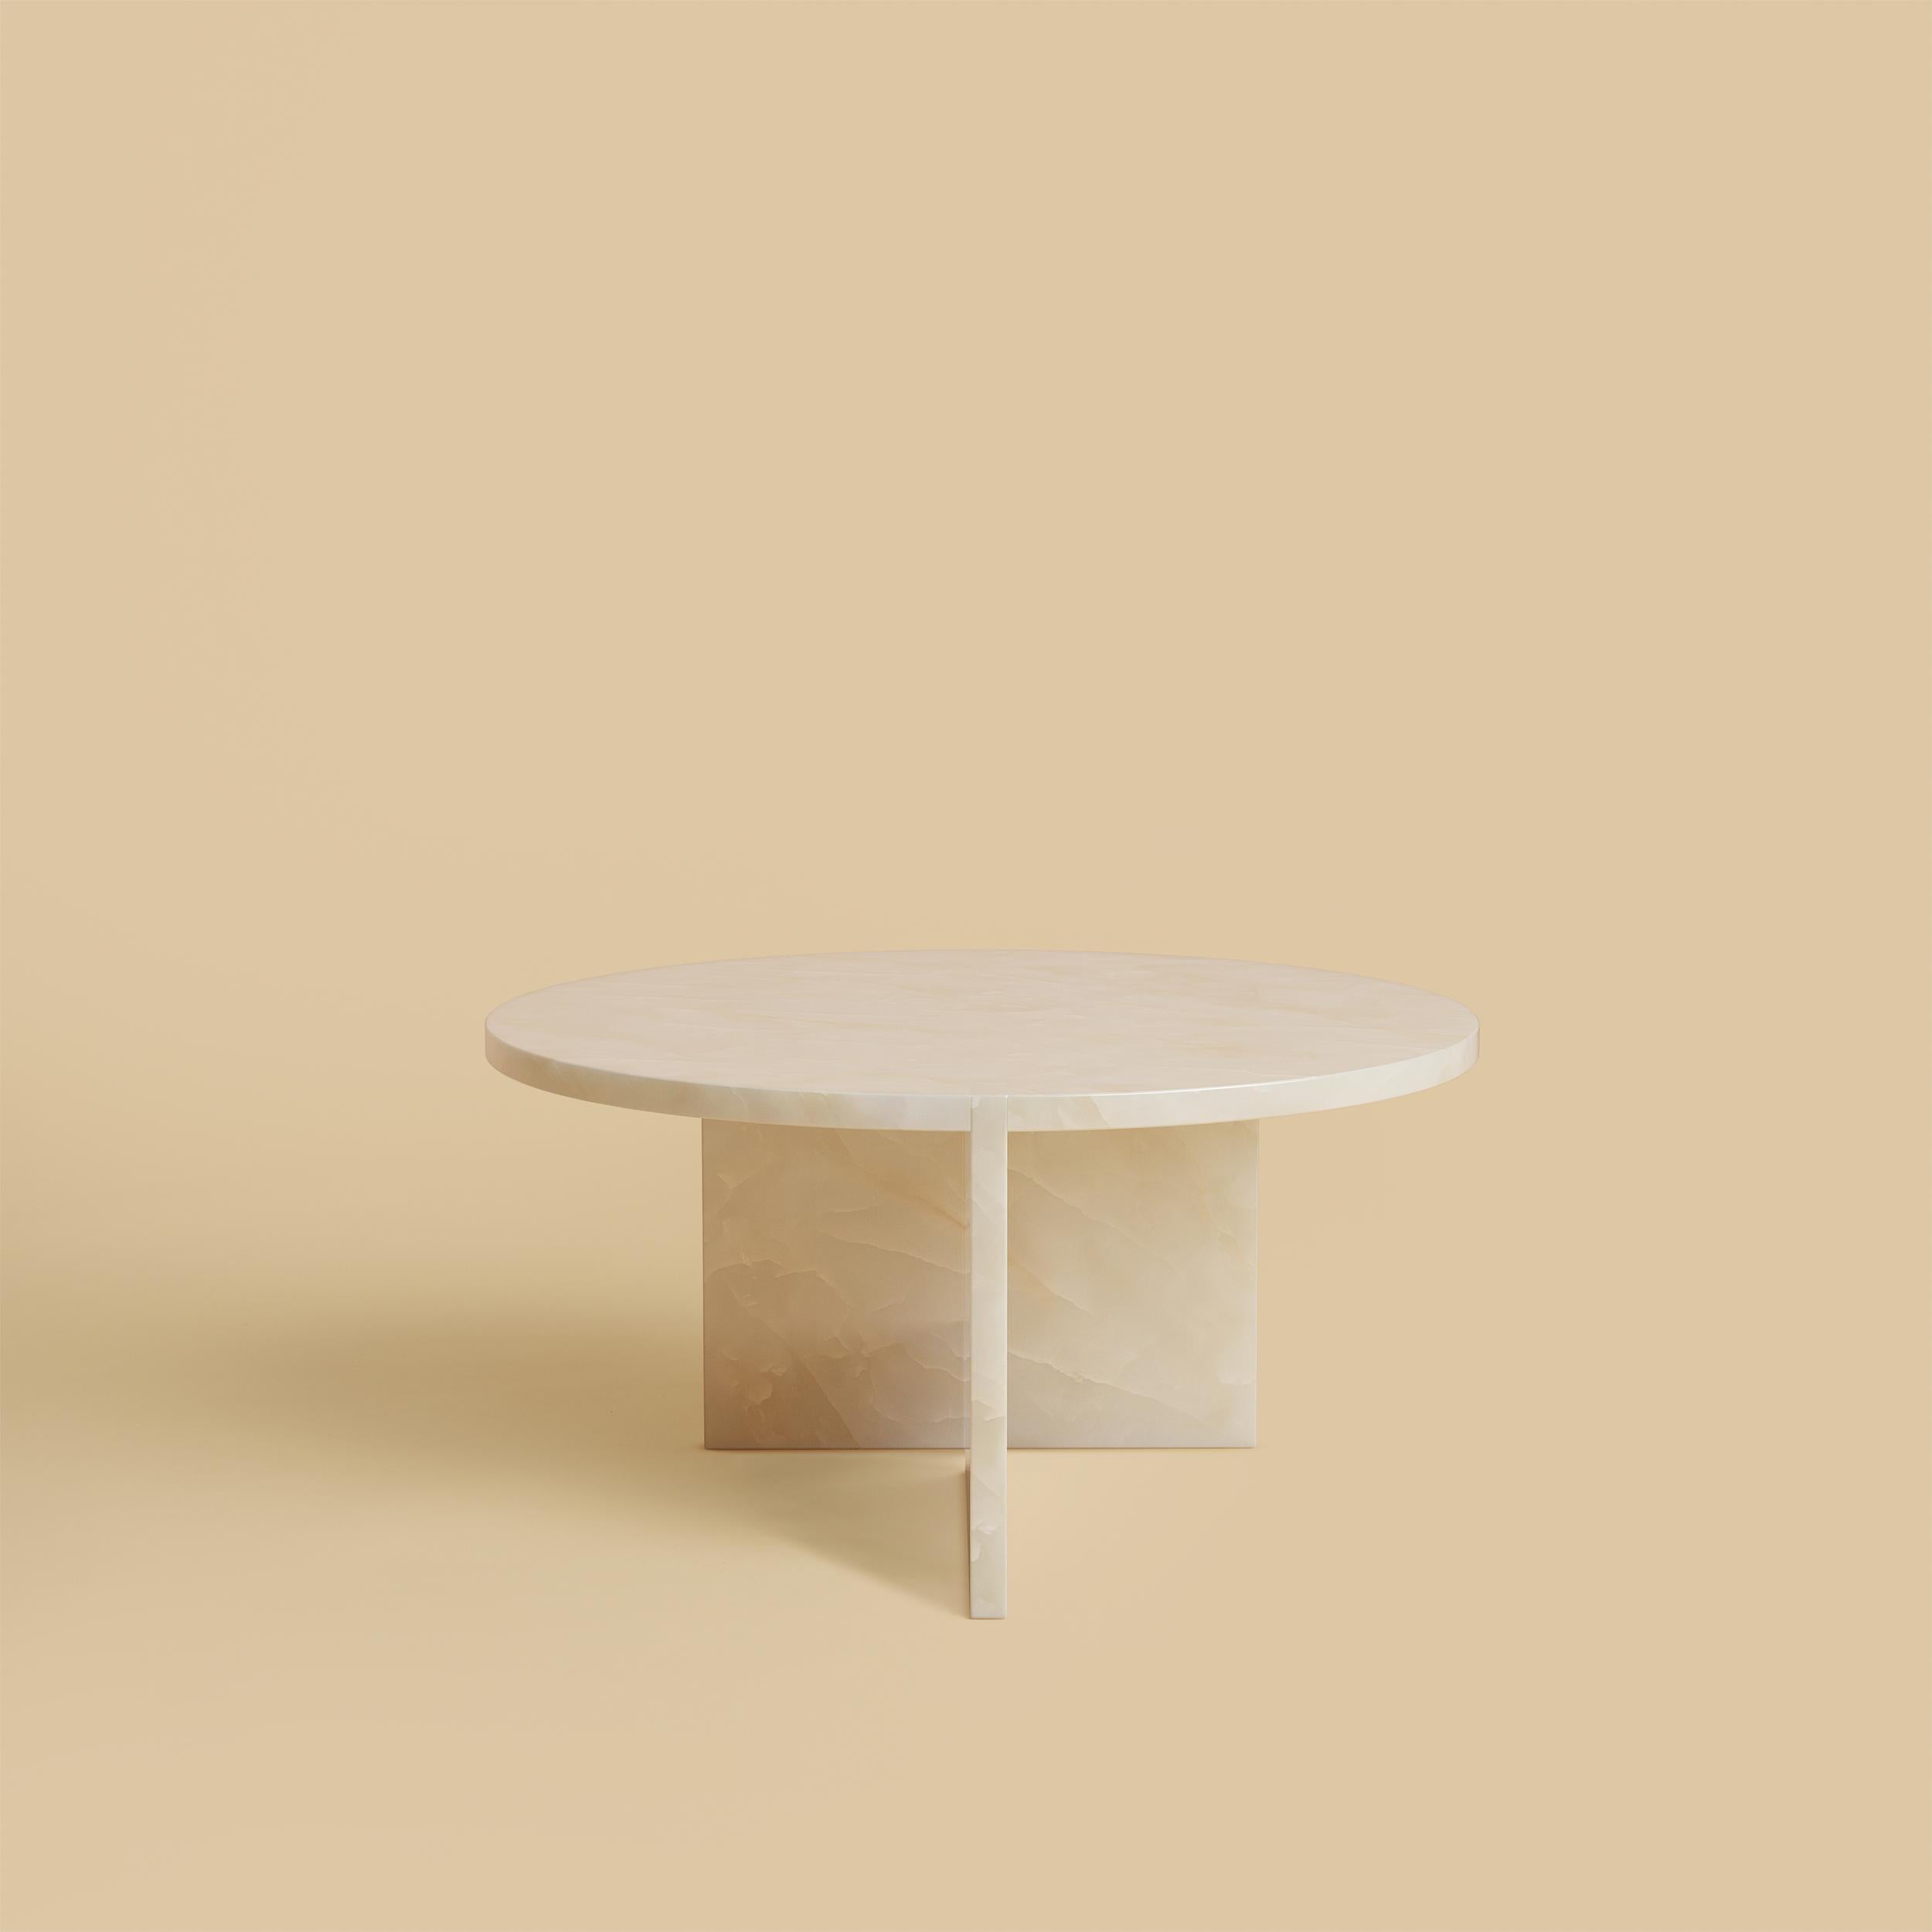 The Hashi coffee table is made entirely of luxury white onyx. The top is circular and 60 cm in diameter, the legs are made from two marble boards in which one part is inlaid on the top as a very elegant detail.
Artisanal production made of